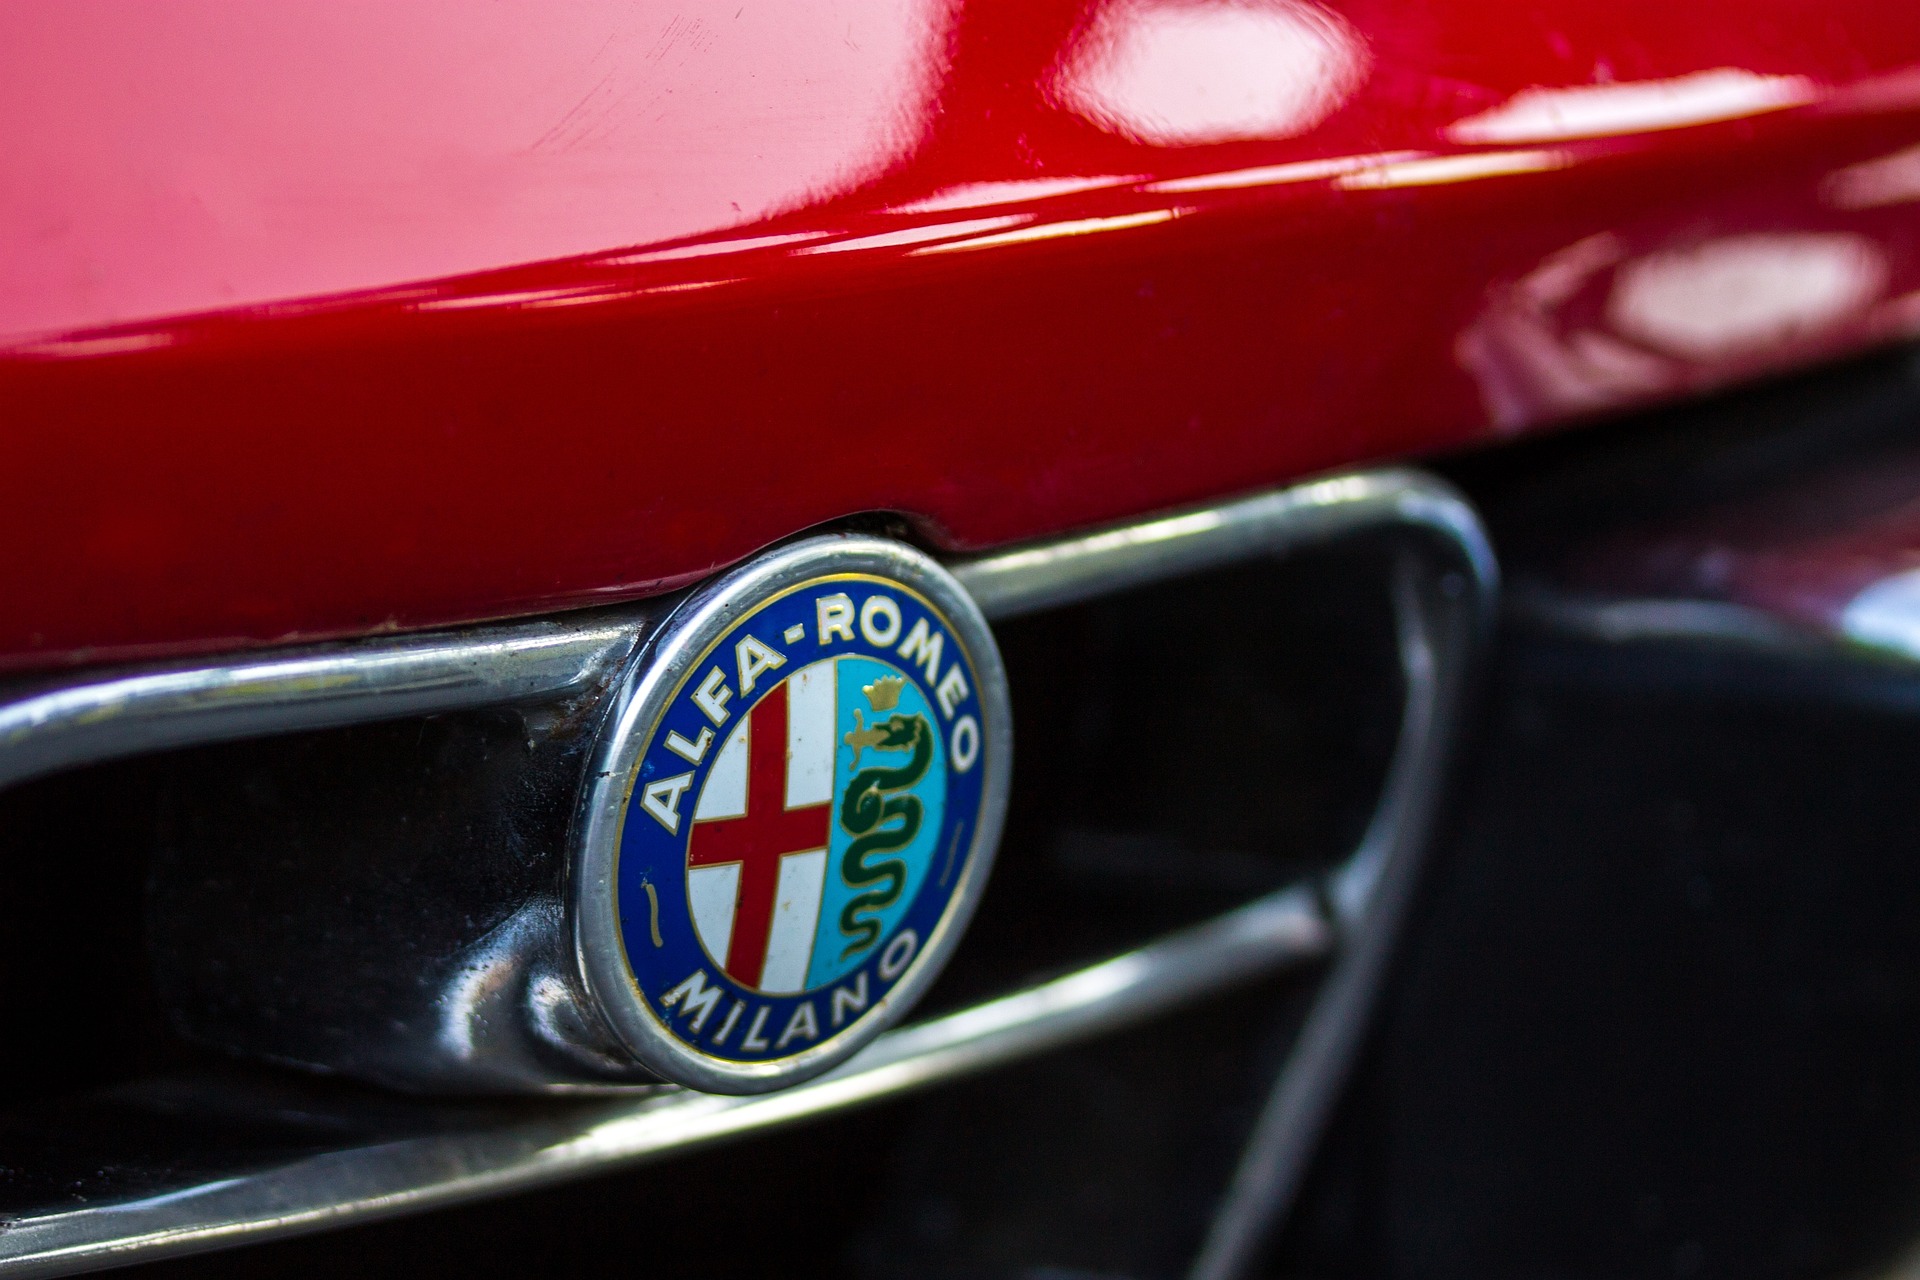 The Alfa Romeo Crest on the front of a vehicle